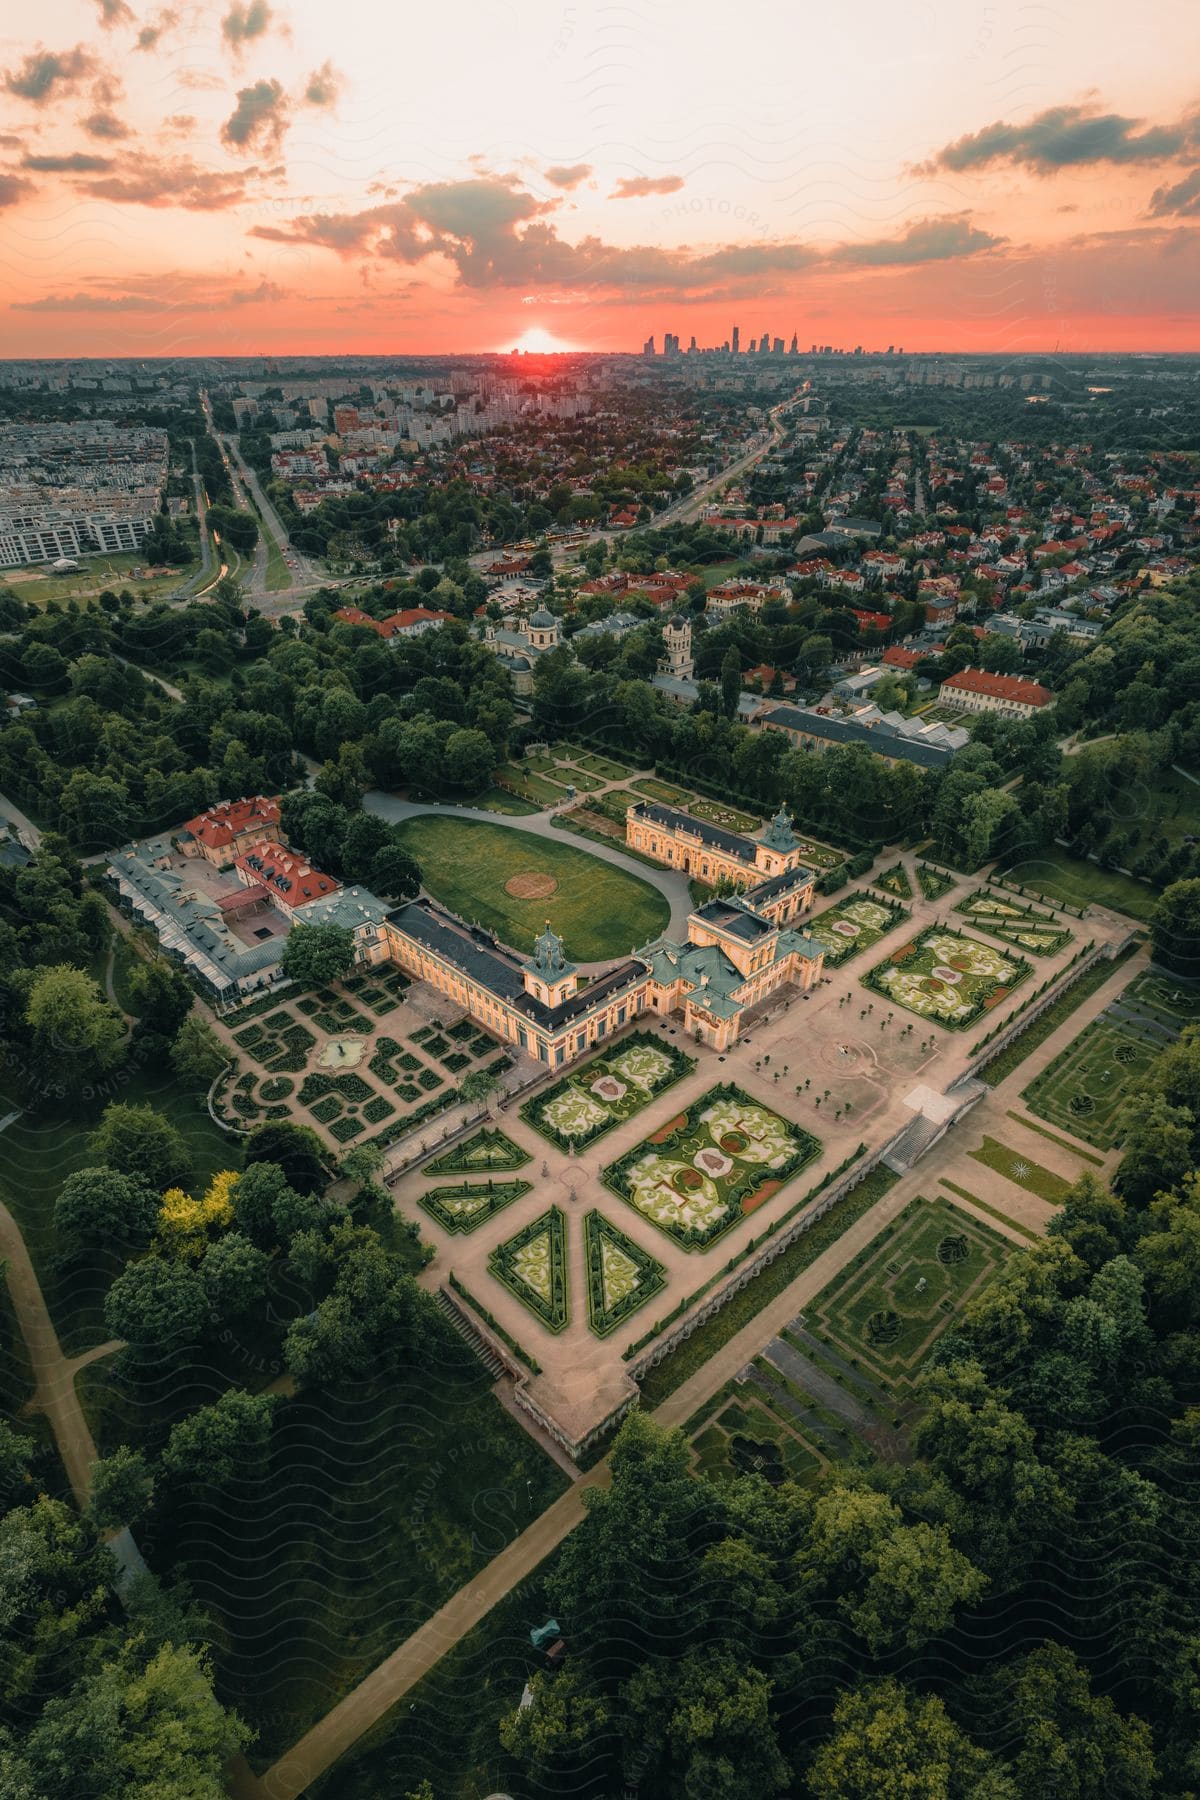 Aerial panorama on a reddish cell morning with sun on the horizon from the Museum of King Jan III's Palace at Wilanów.